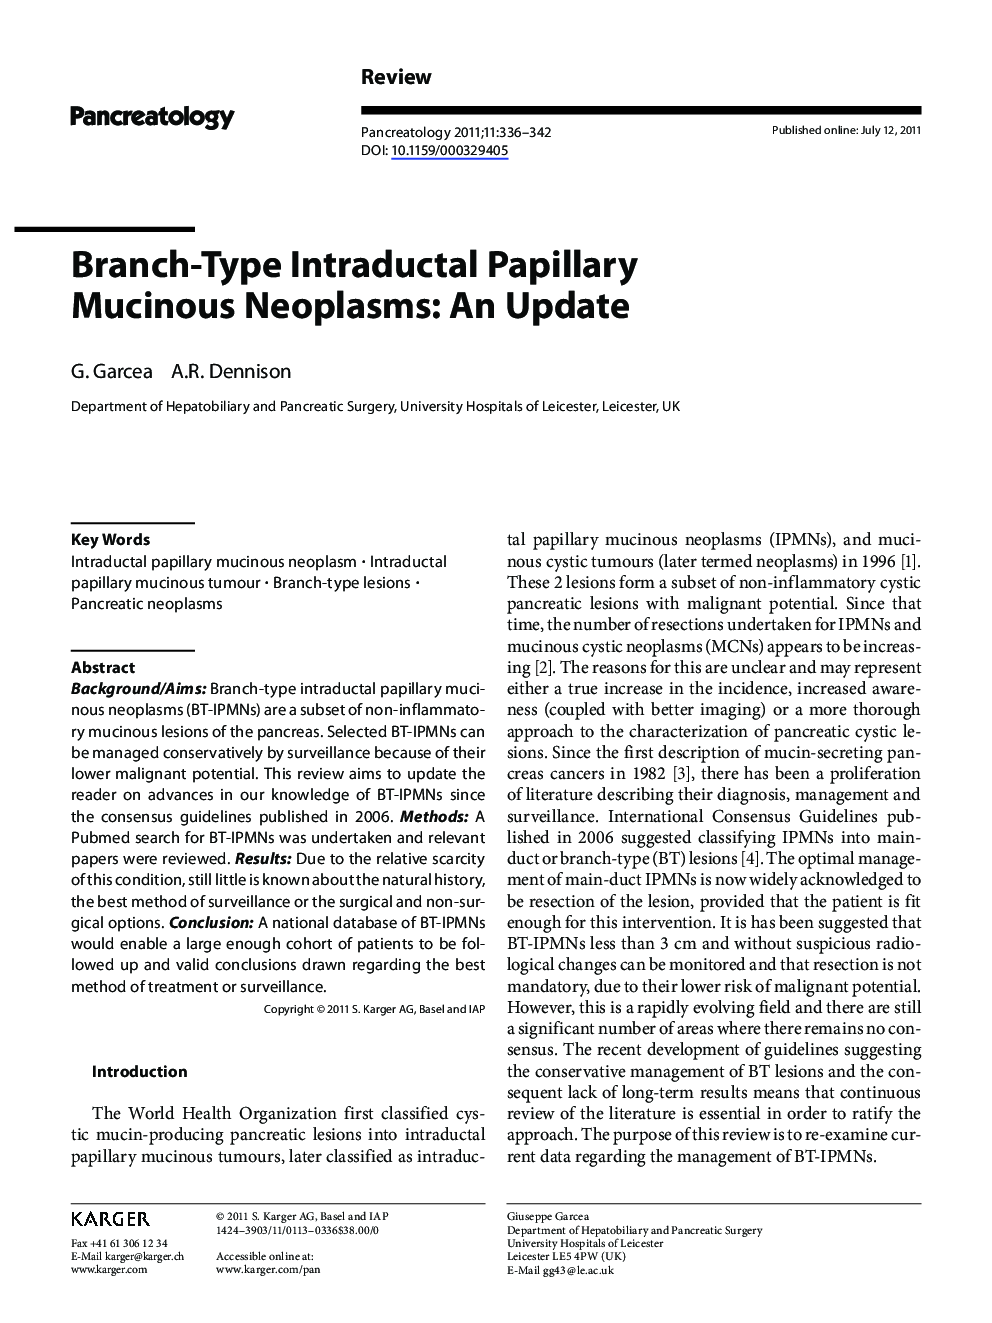 Branch-Type Intraductal Papillary Mucinous Neoplasms: An Update